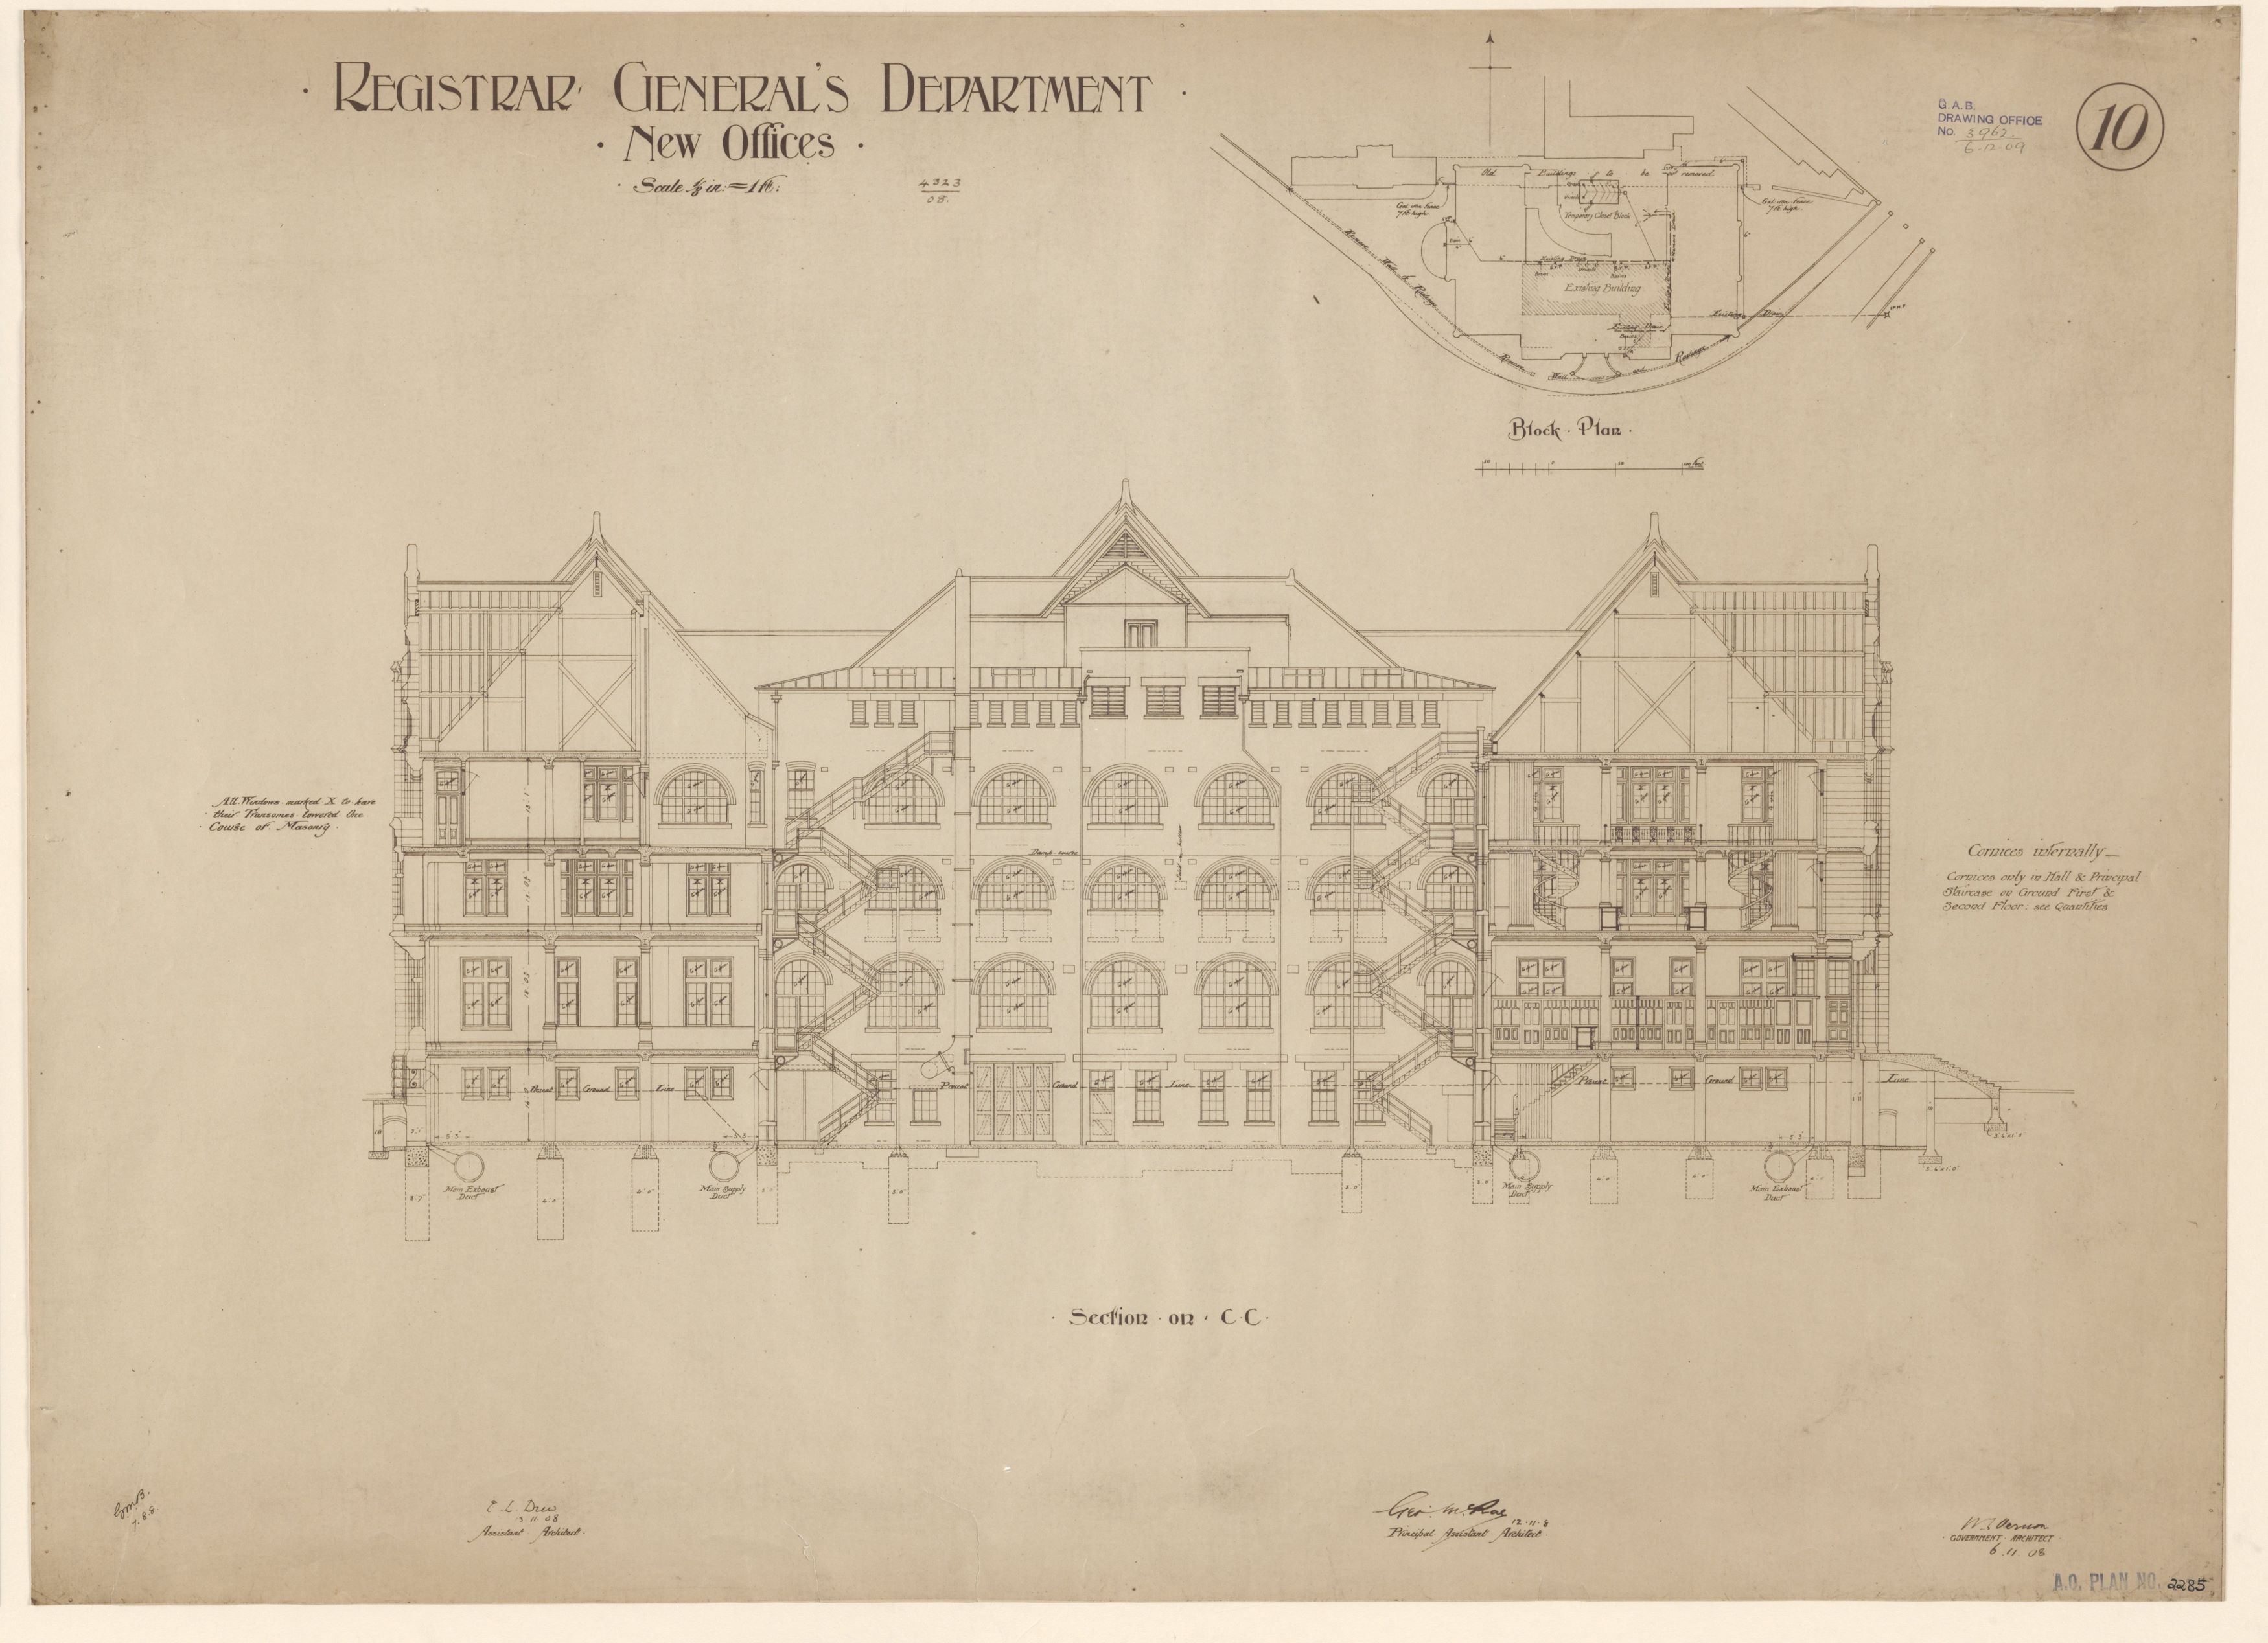 Plan of the Register General's offices